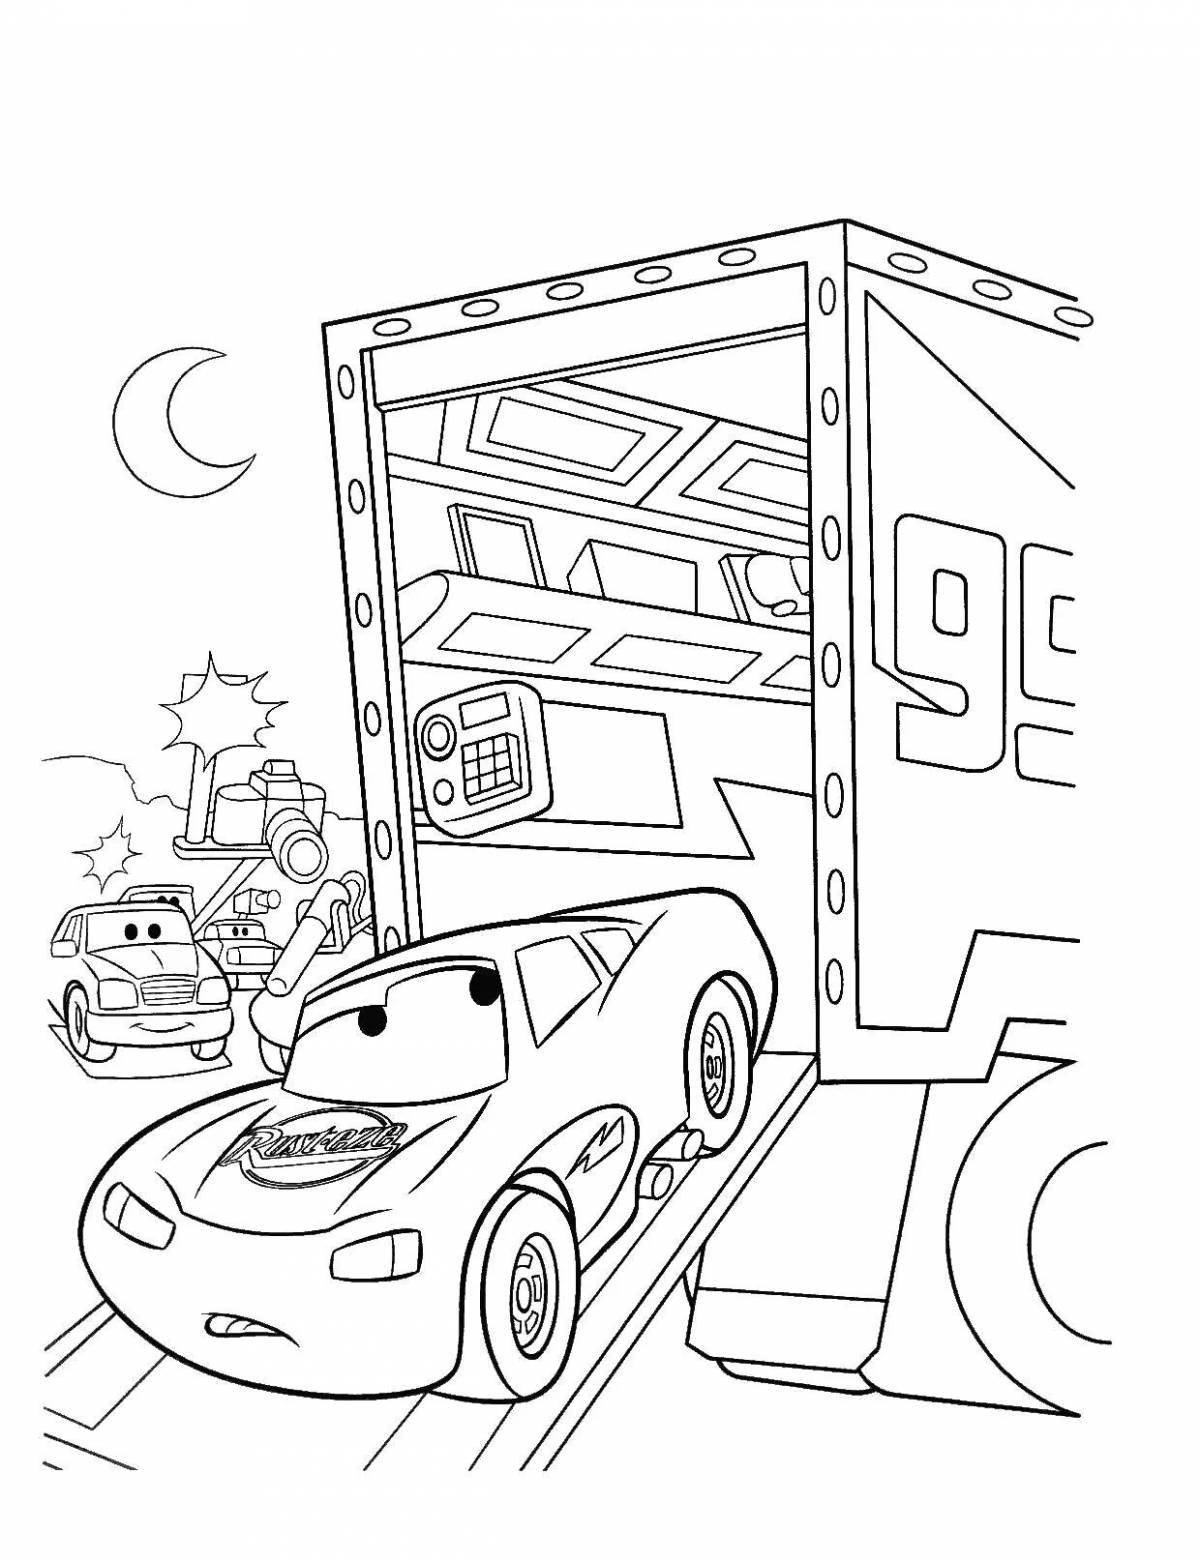 Exciting parking coloring page